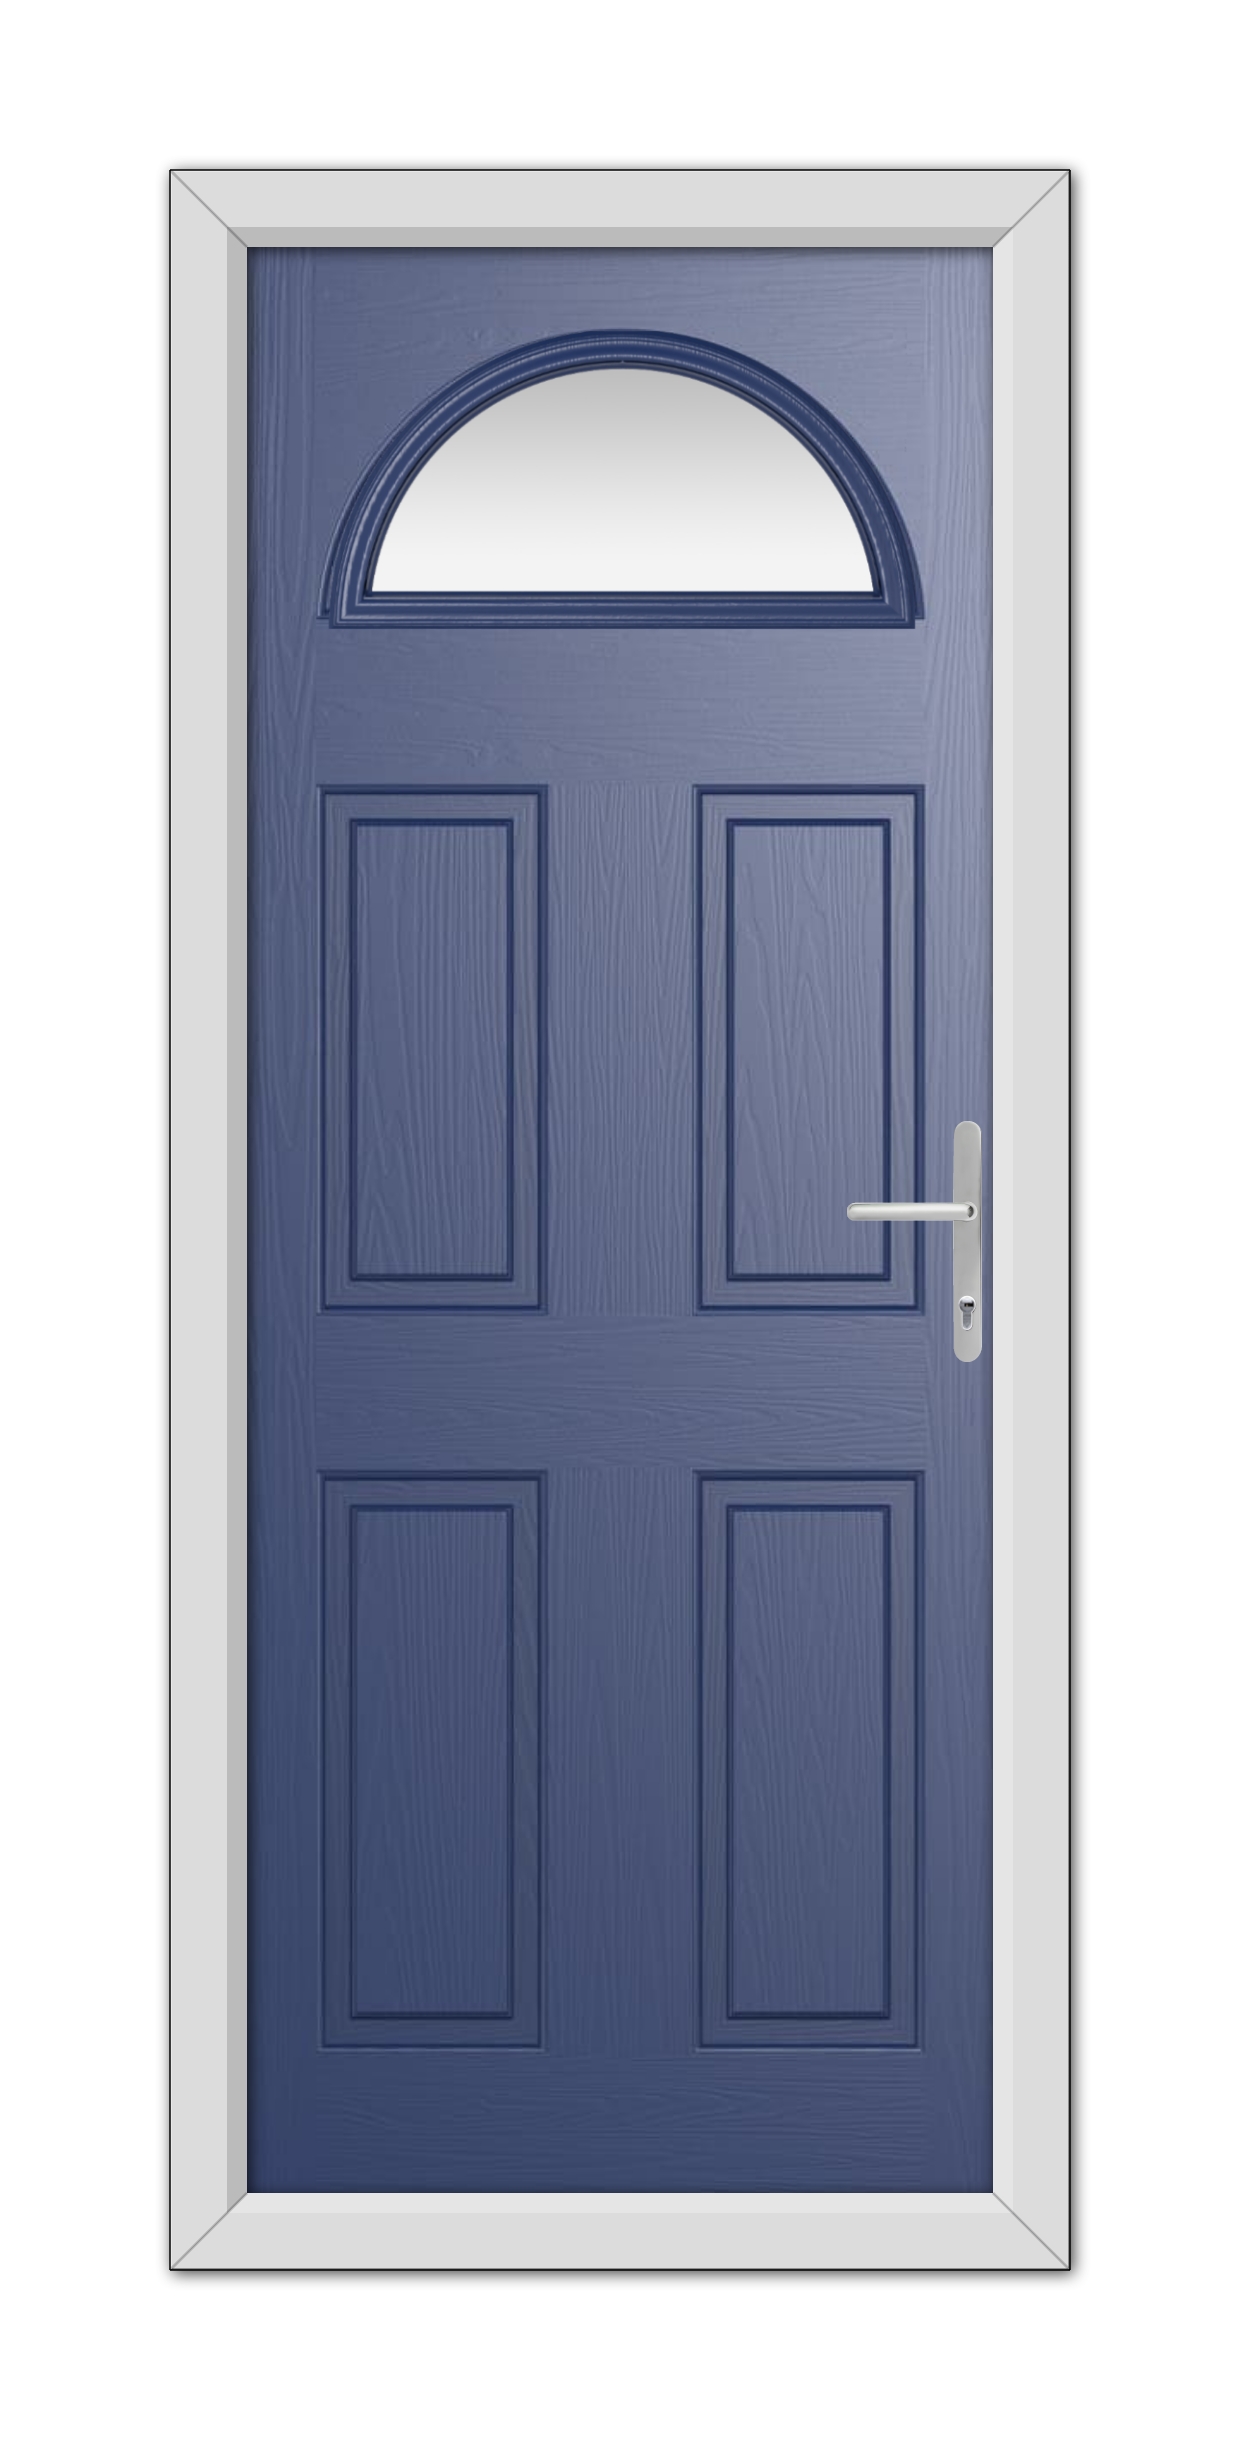 Blue Winslow 1 Composite Door 48mm Timber Core with six panels and an arched window, featuring a modern white handle, set in a white door frame.